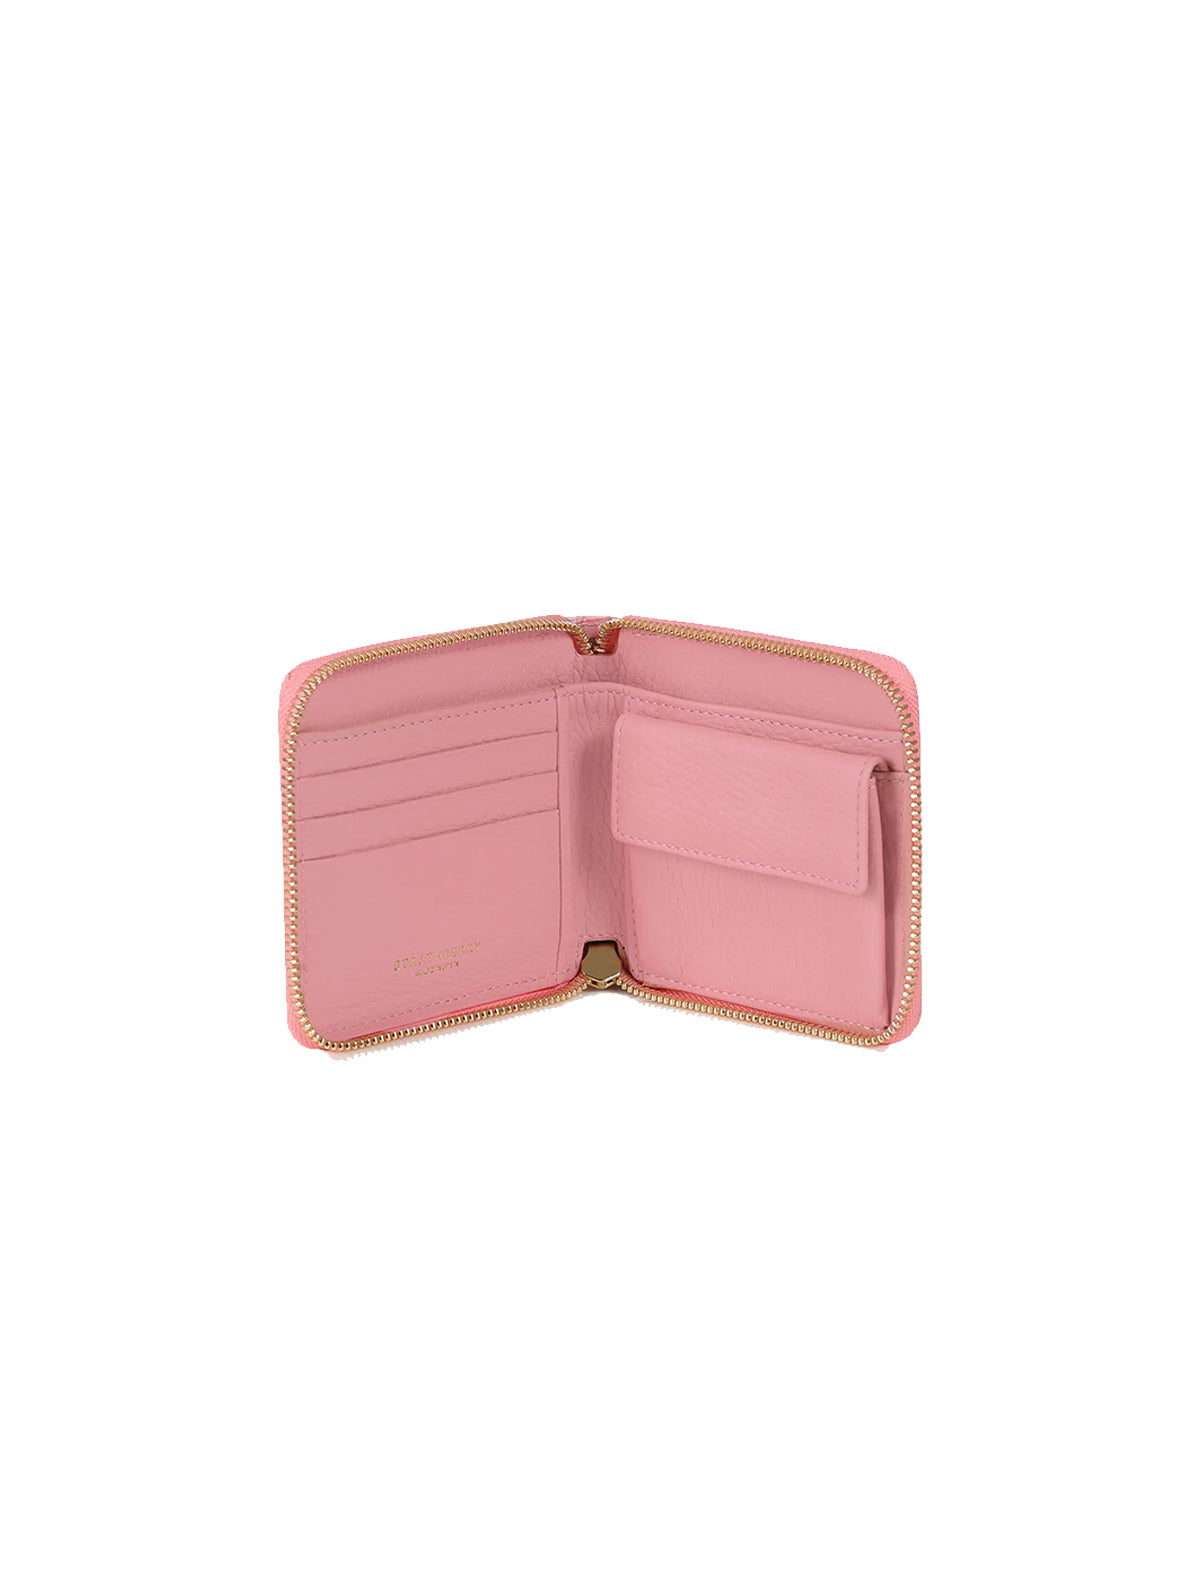 STRATHBERRY Rose Street Wallet Embossed Croc Leather in Caledonian Pink